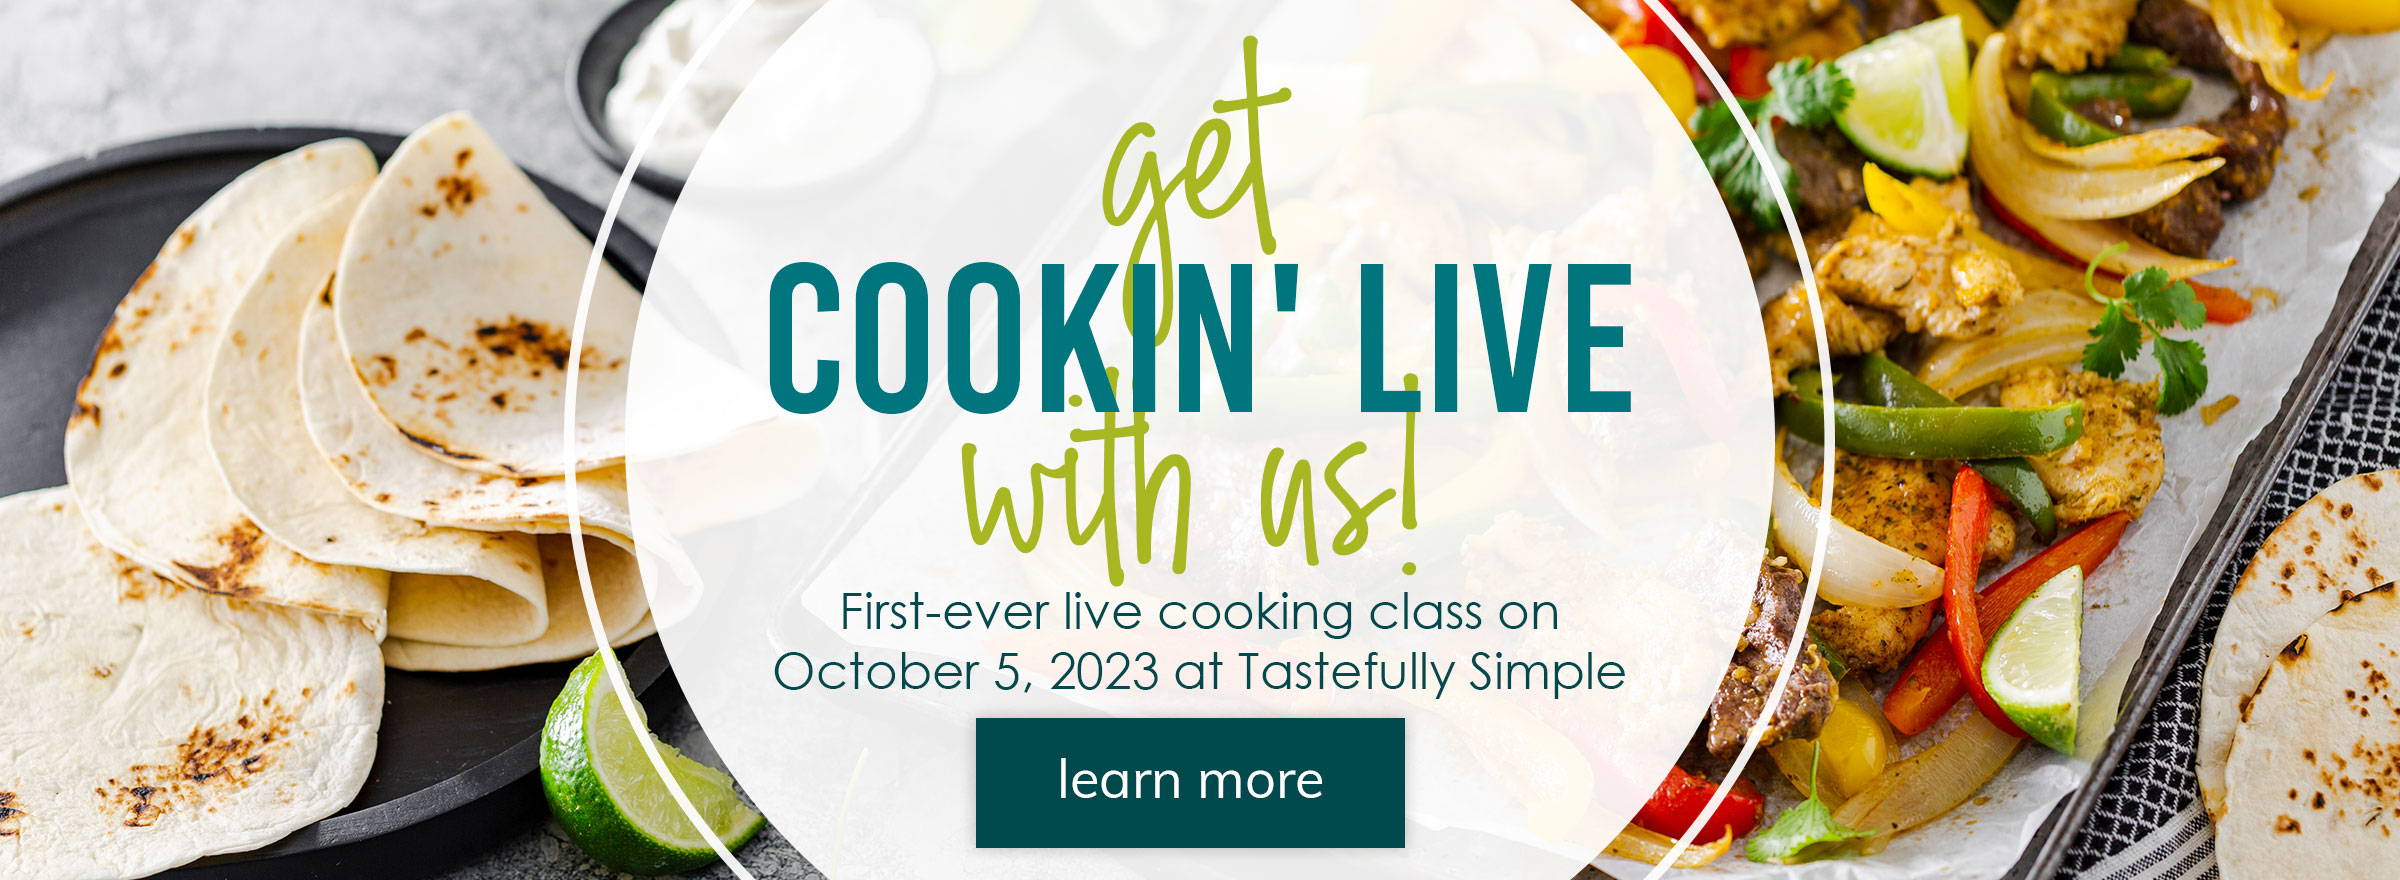 get cookin' live with us!